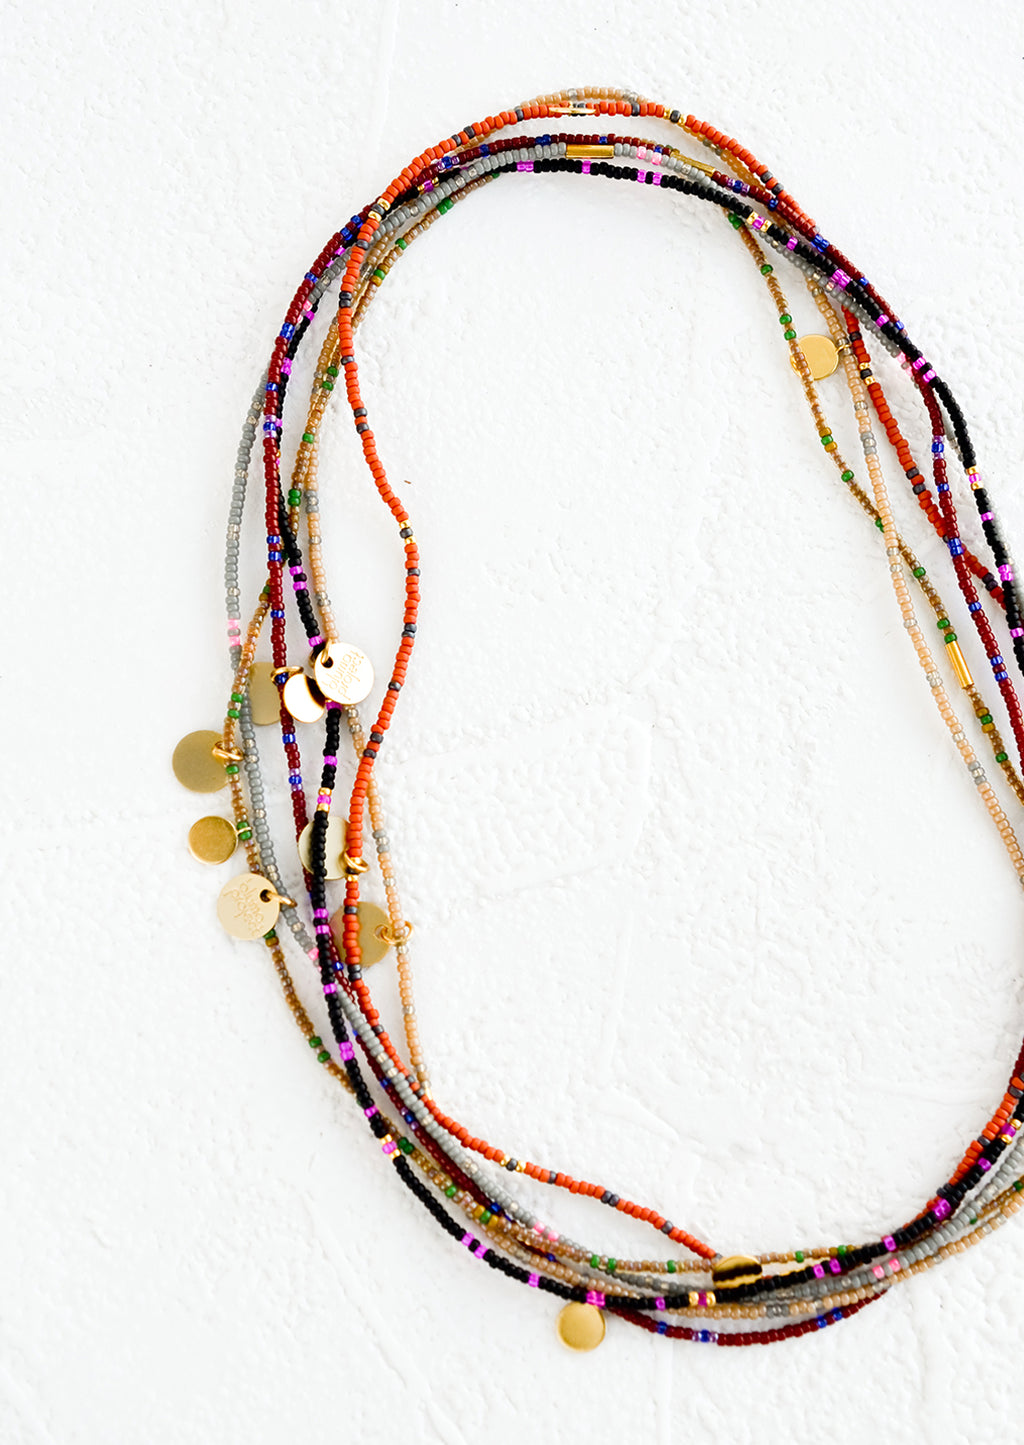 2: A layered, stacked pile of seed bead choker necklaces with brass charm details.